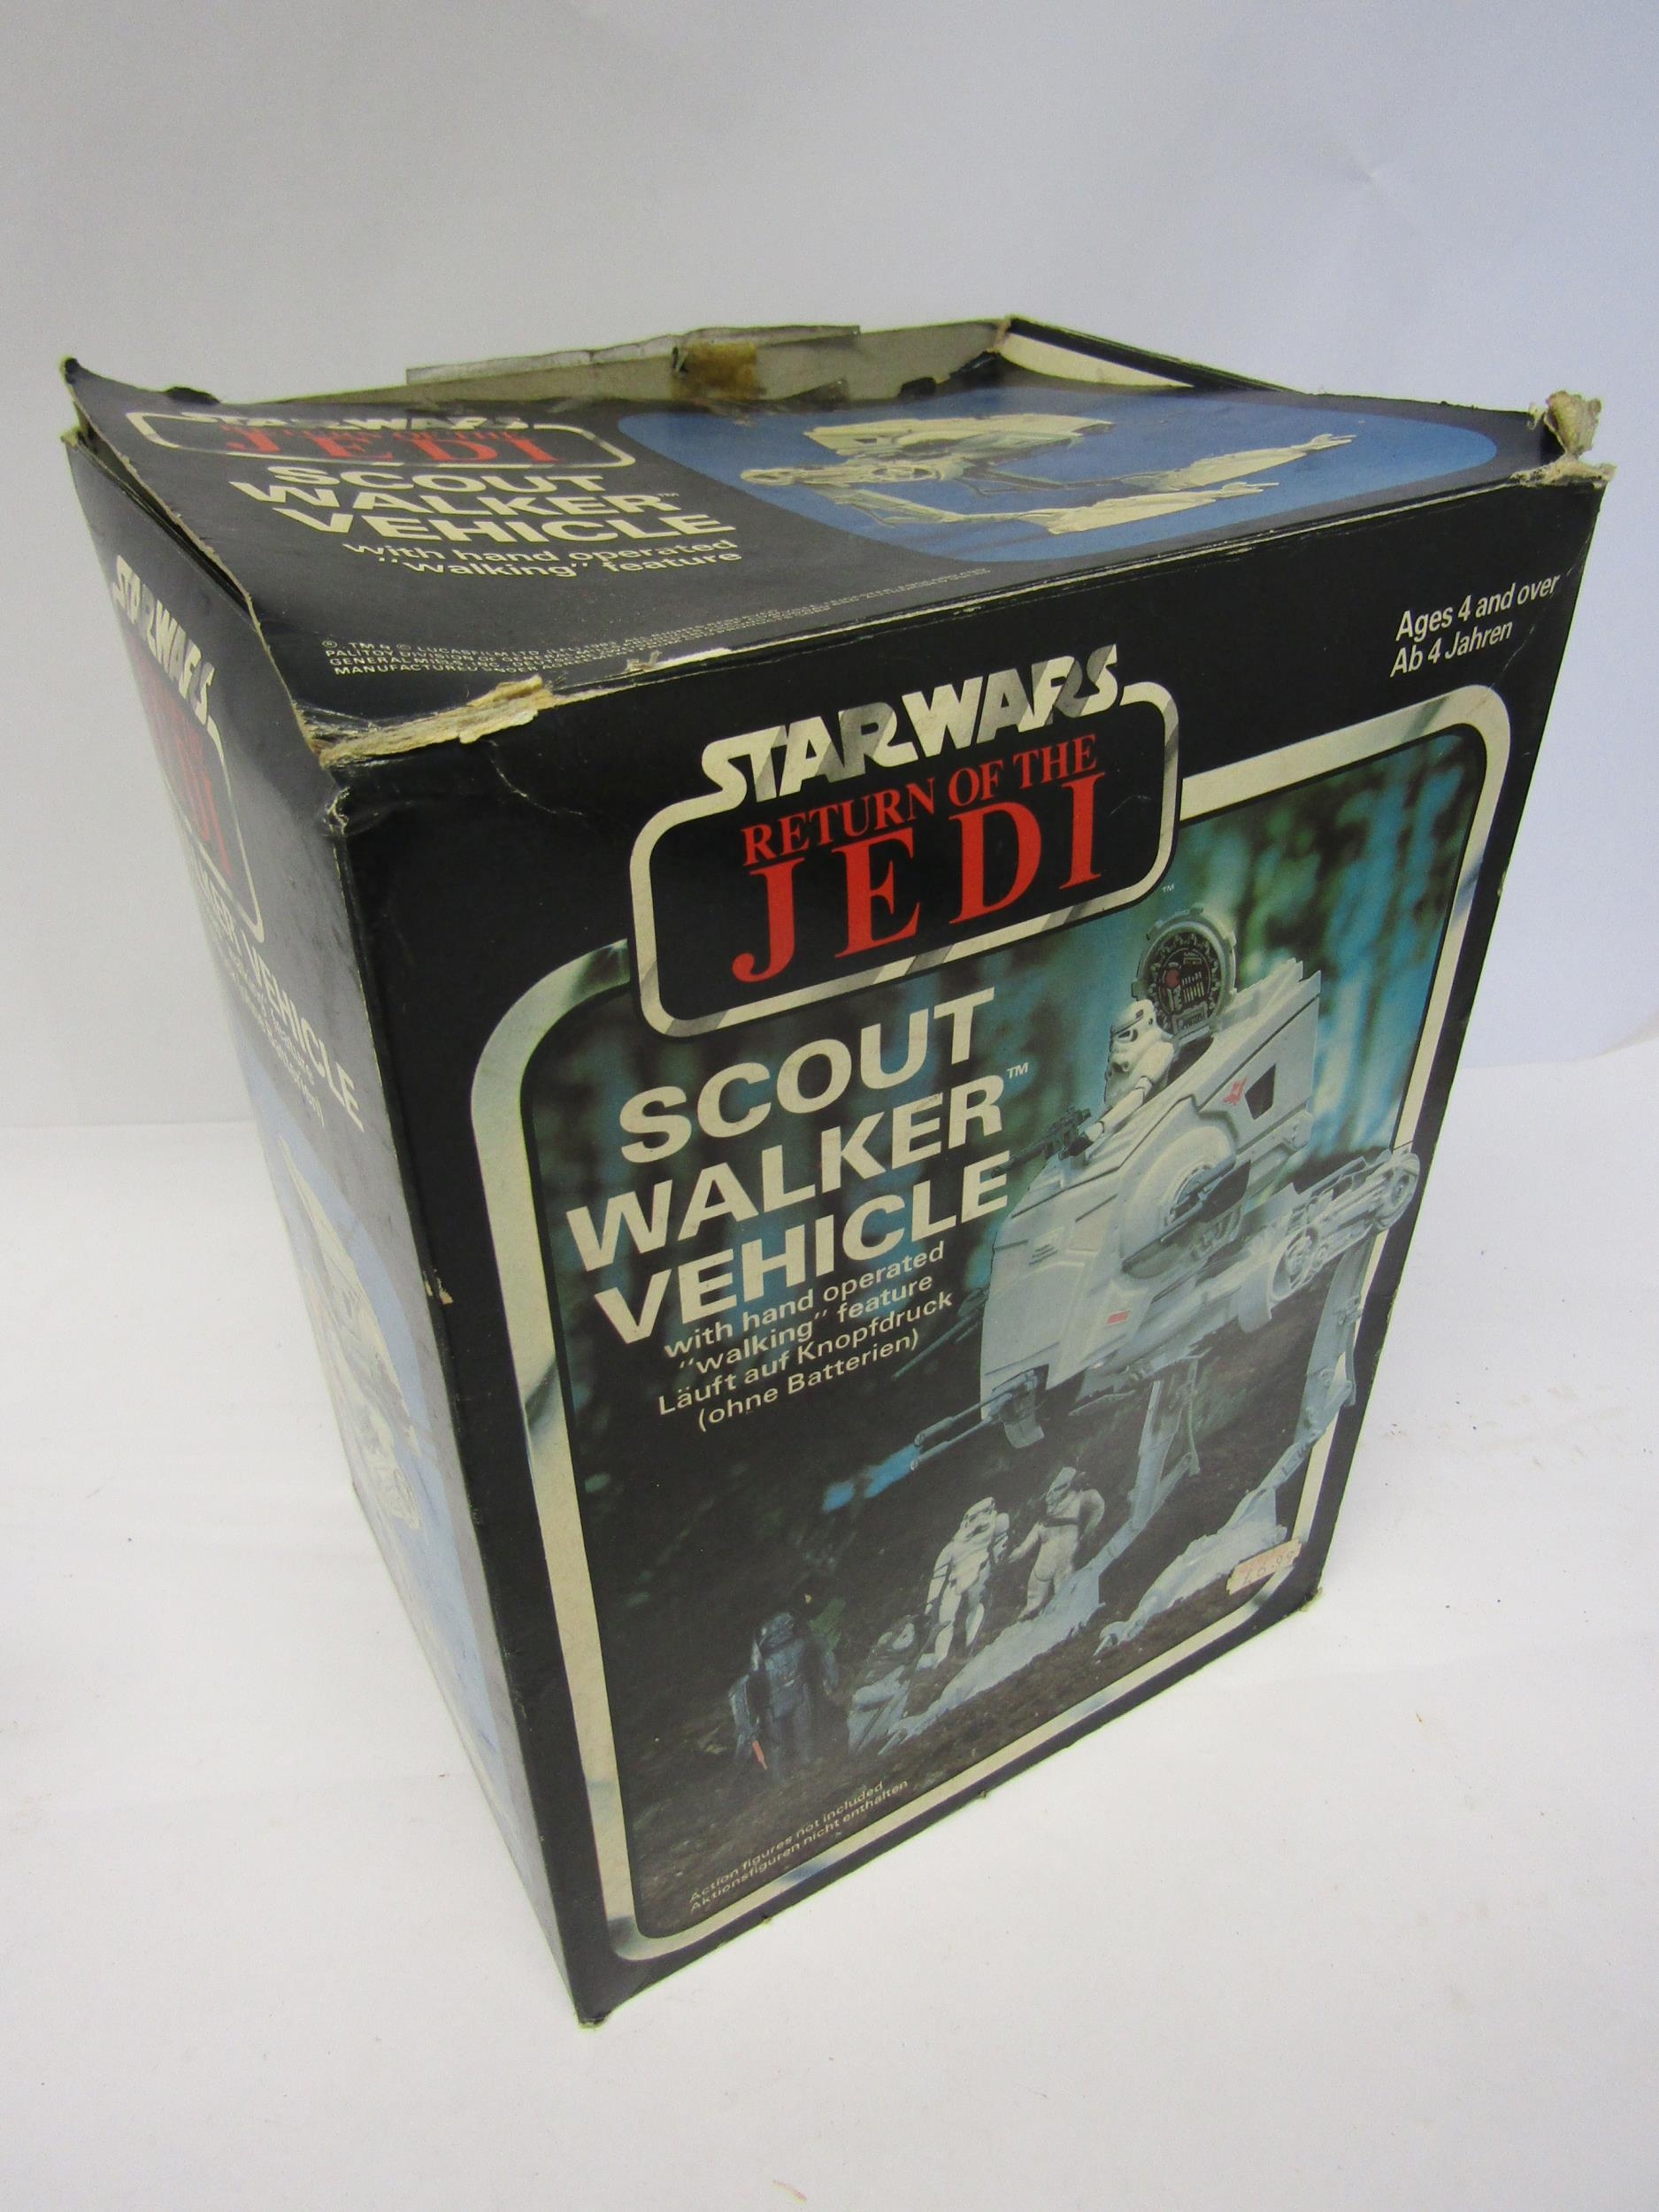 A vintage boxed Palitoy Star Wars Return Of If The Jedi Scout Walker Vehicle with instruction sheet, - Image 3 of 3